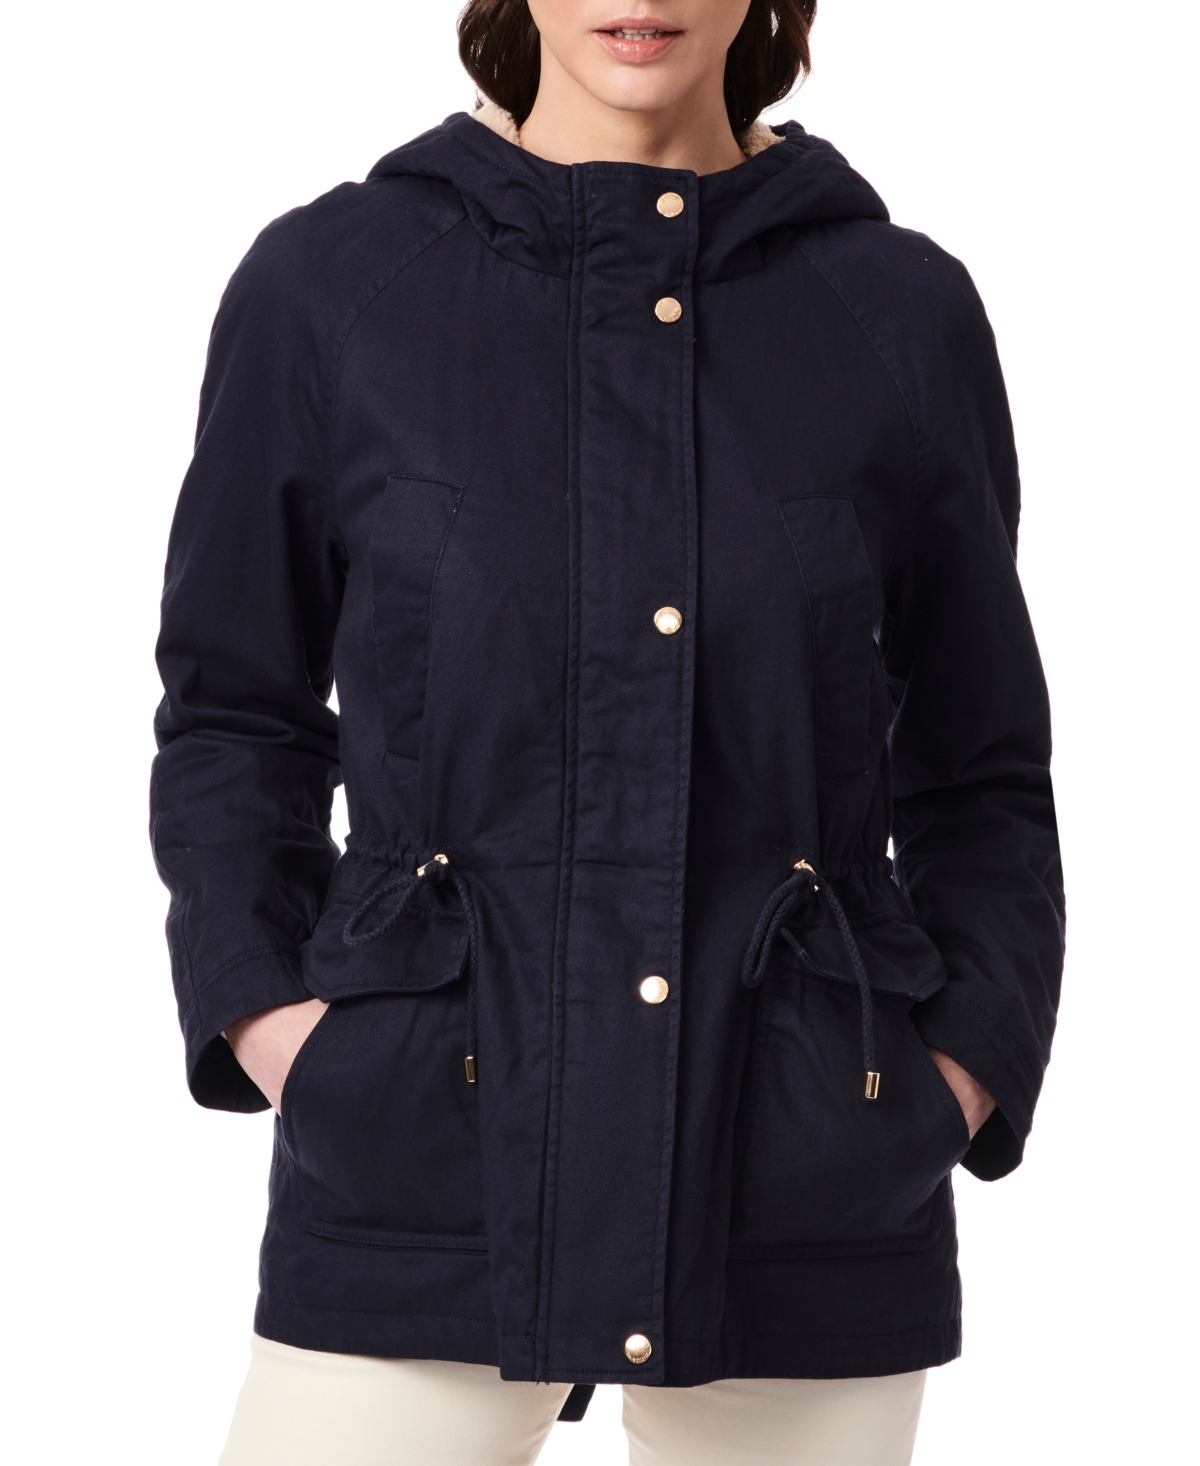 Collection B Juniors' Trendy Hooded Drawstring Waist Anorak Parka Jacket, Created for Macy's